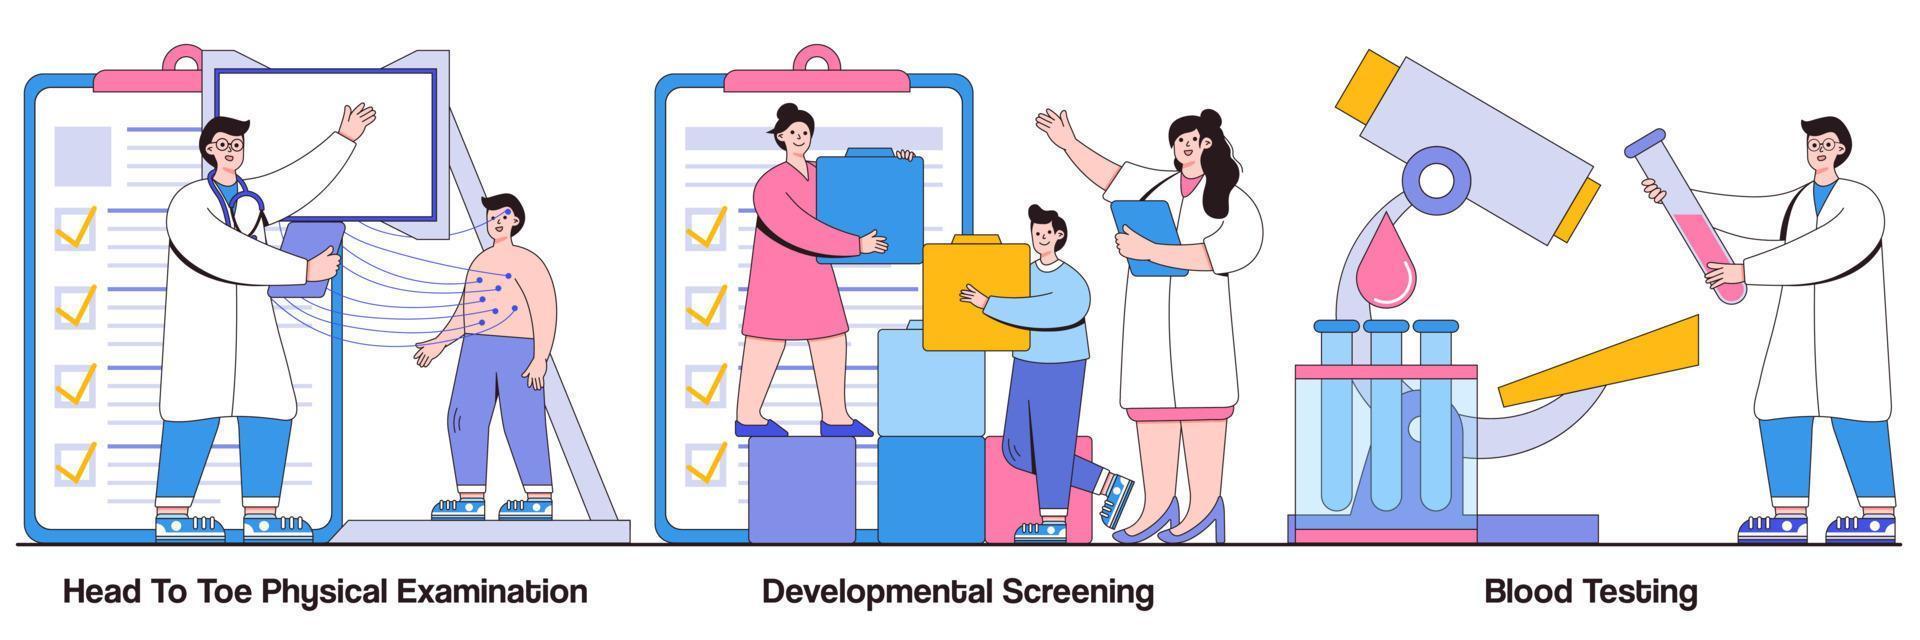 Head-To-Toe Physical Examination, Developmental Screening, and Blood Testing Illustrated Pack vector